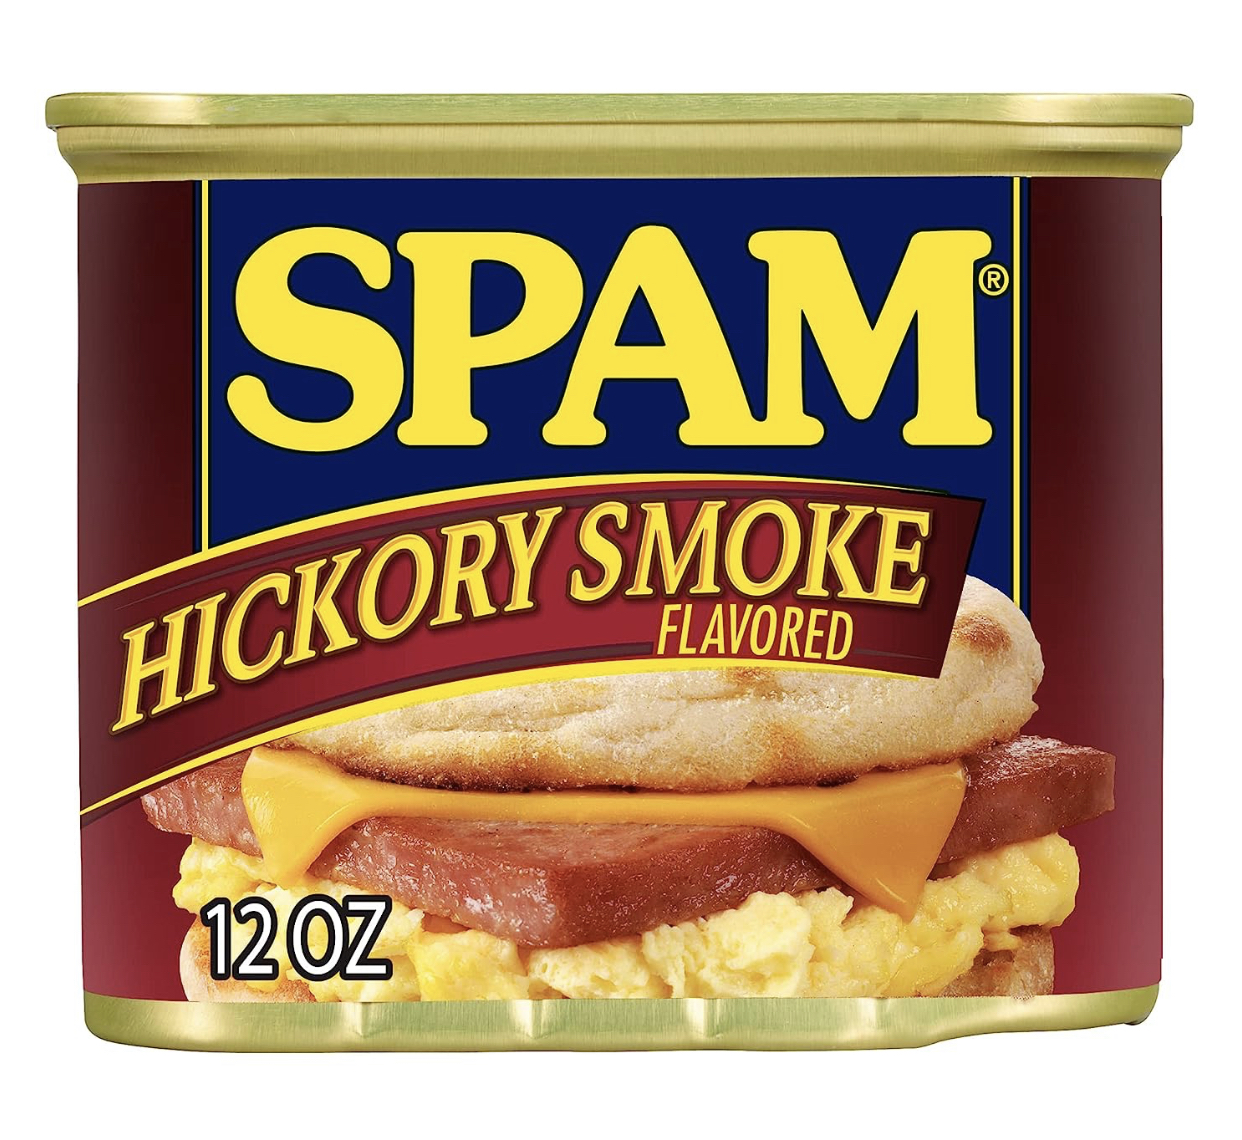 Amazon Prime Day Deal: Hormel Spam Canned Meat Hickory Smoke, or Jalapeño or Hot & Spicy 12 Ounce Can, Less w/SS $2.58